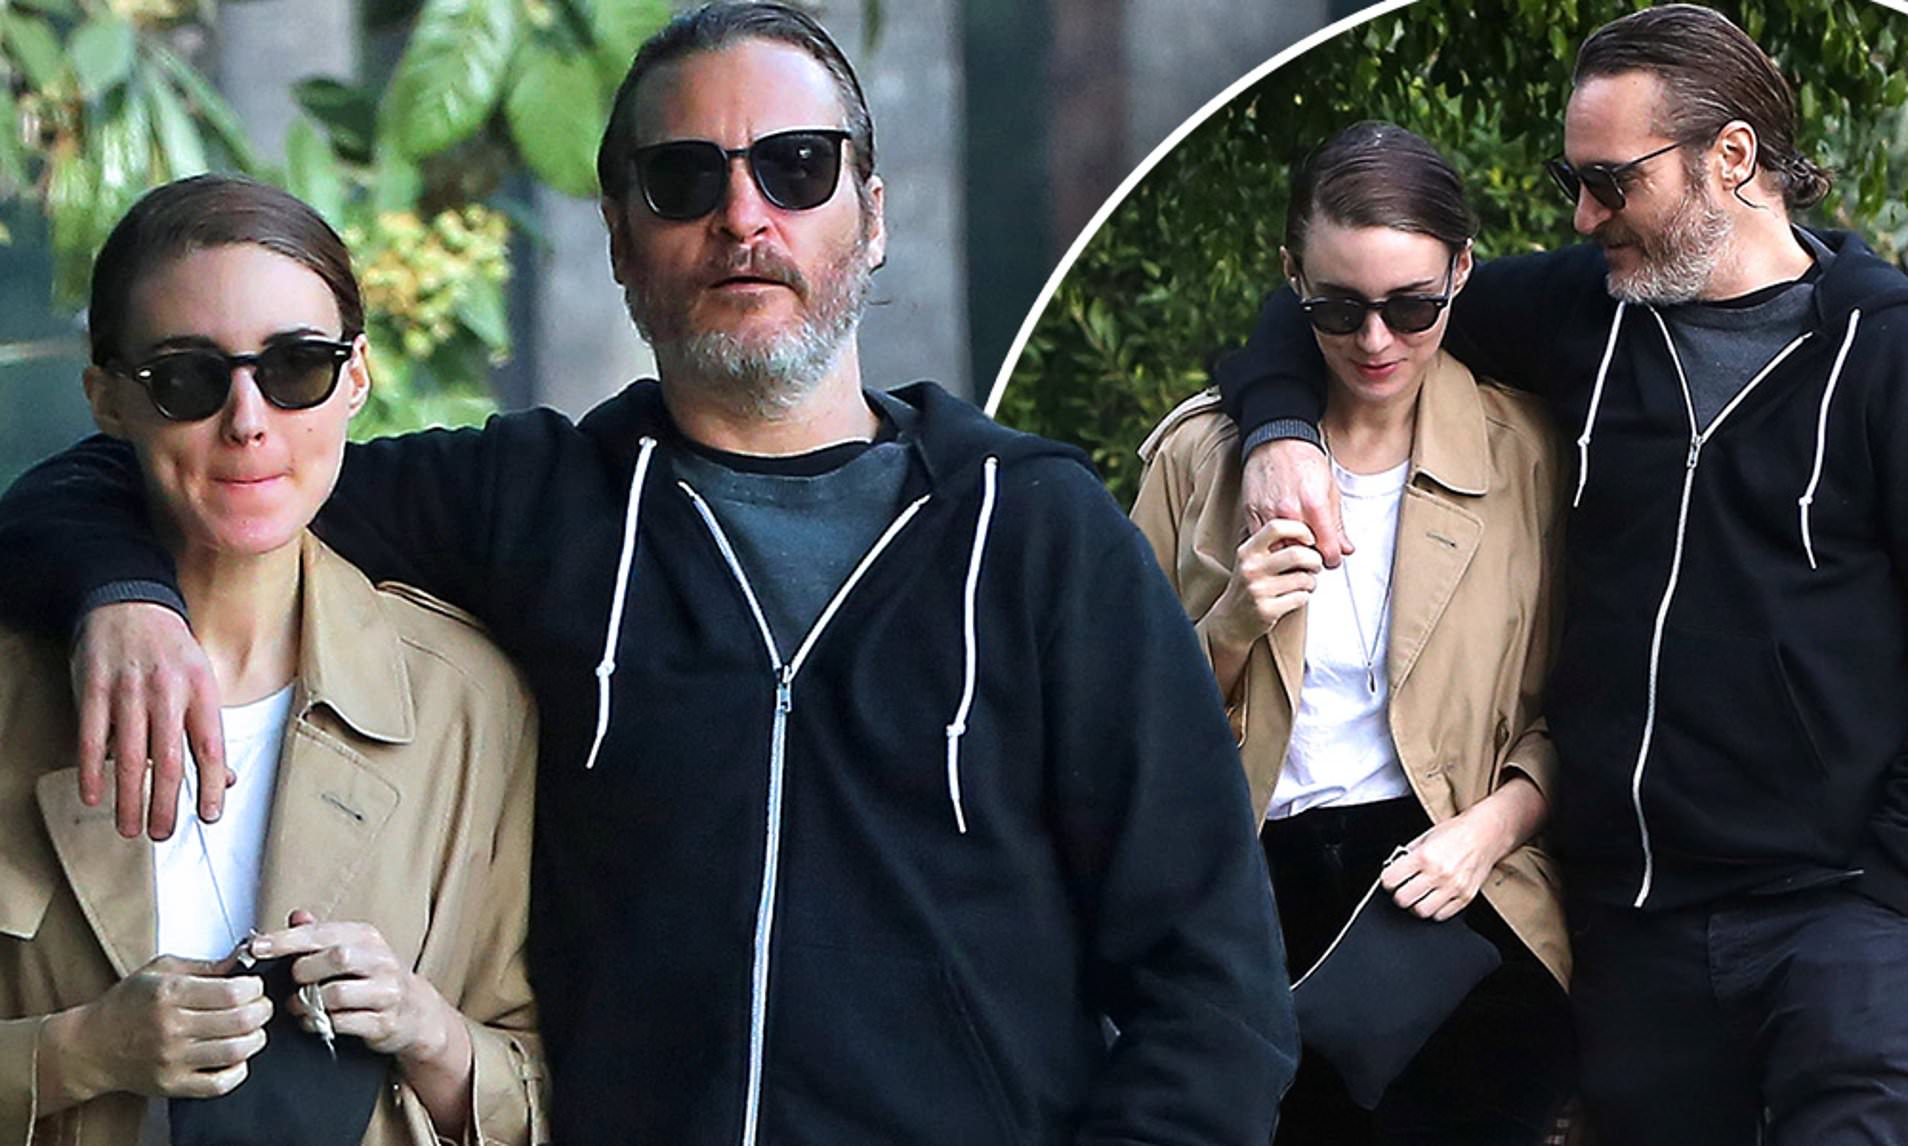 Joaquin Phoenix and Rooney Mara Relationship Story: Here's everything you wants to know